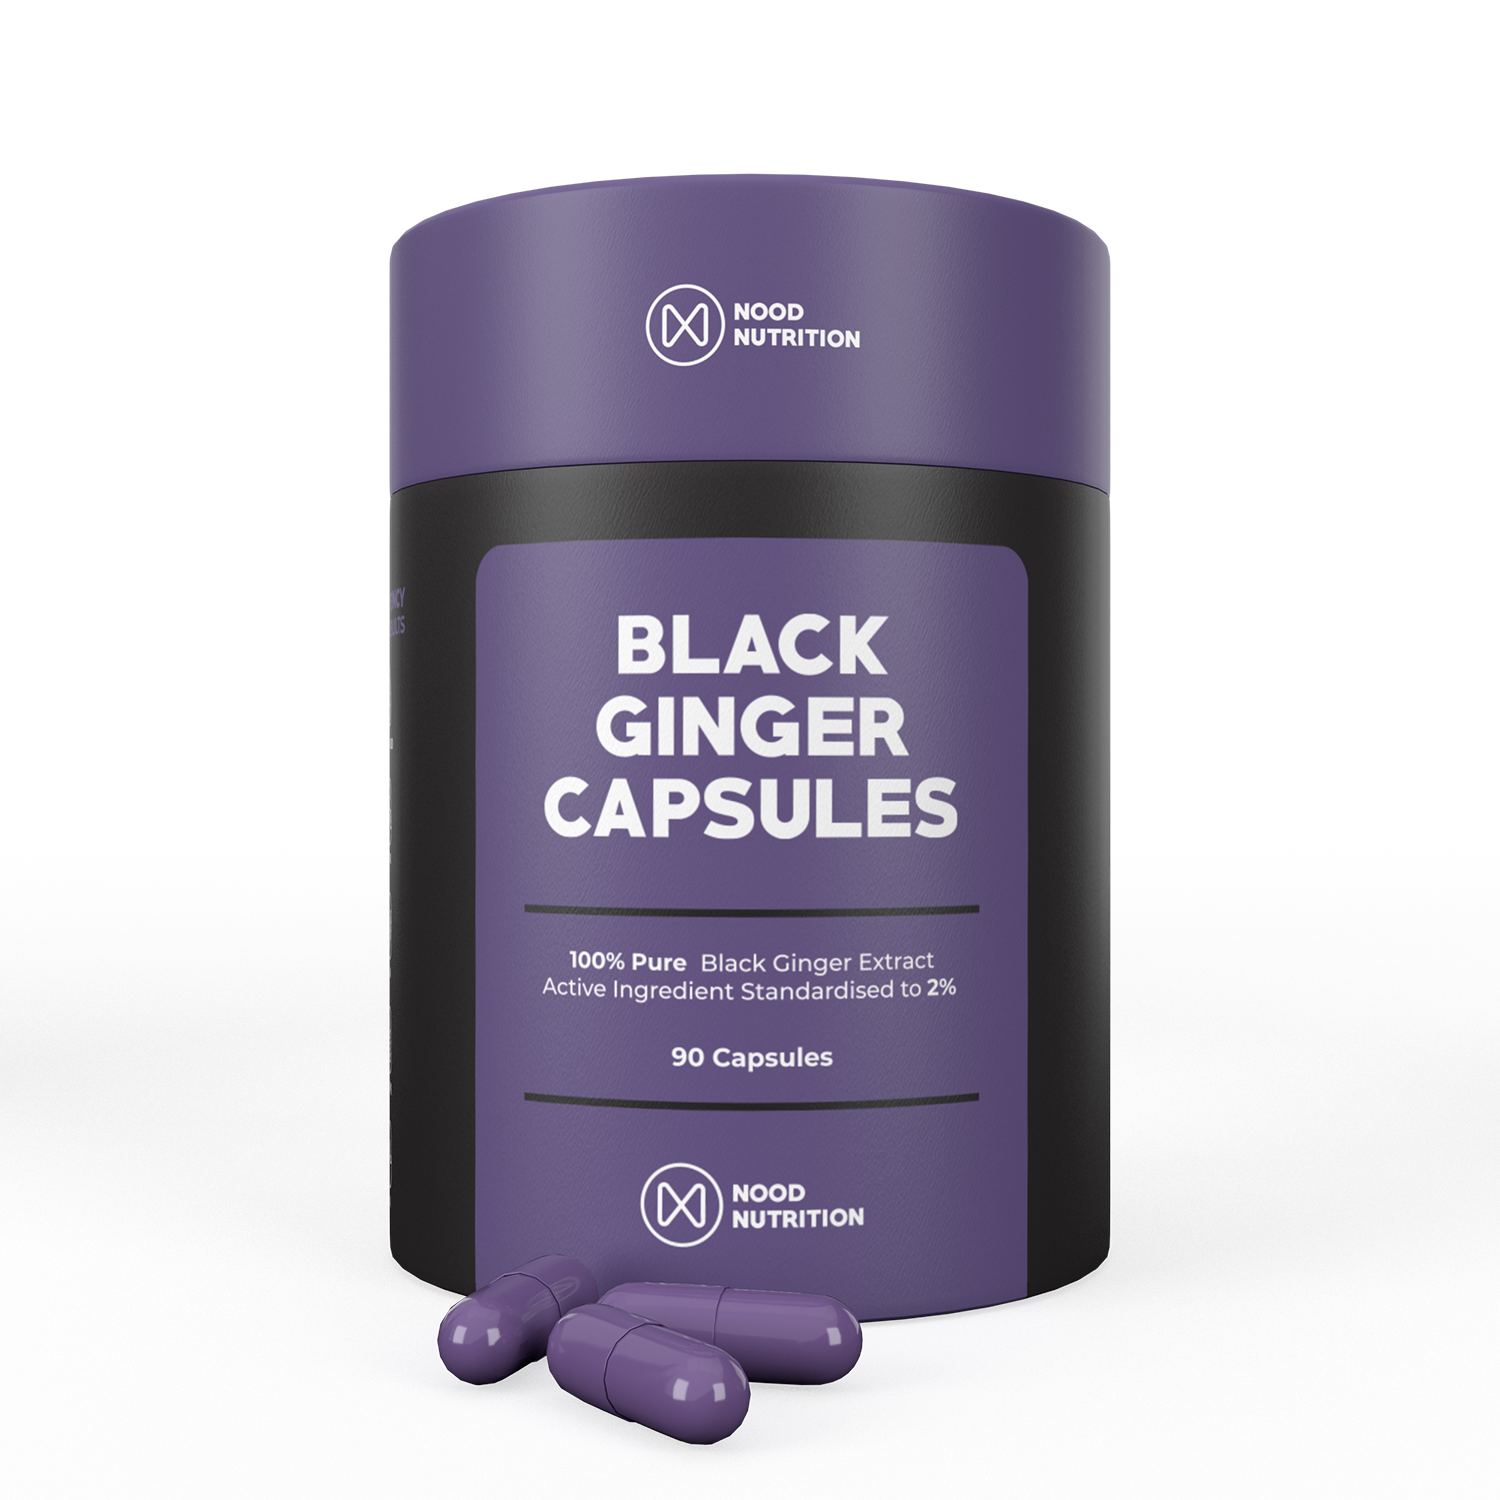 Black Ginger Extract Capsules | Nood Nutrition Australia